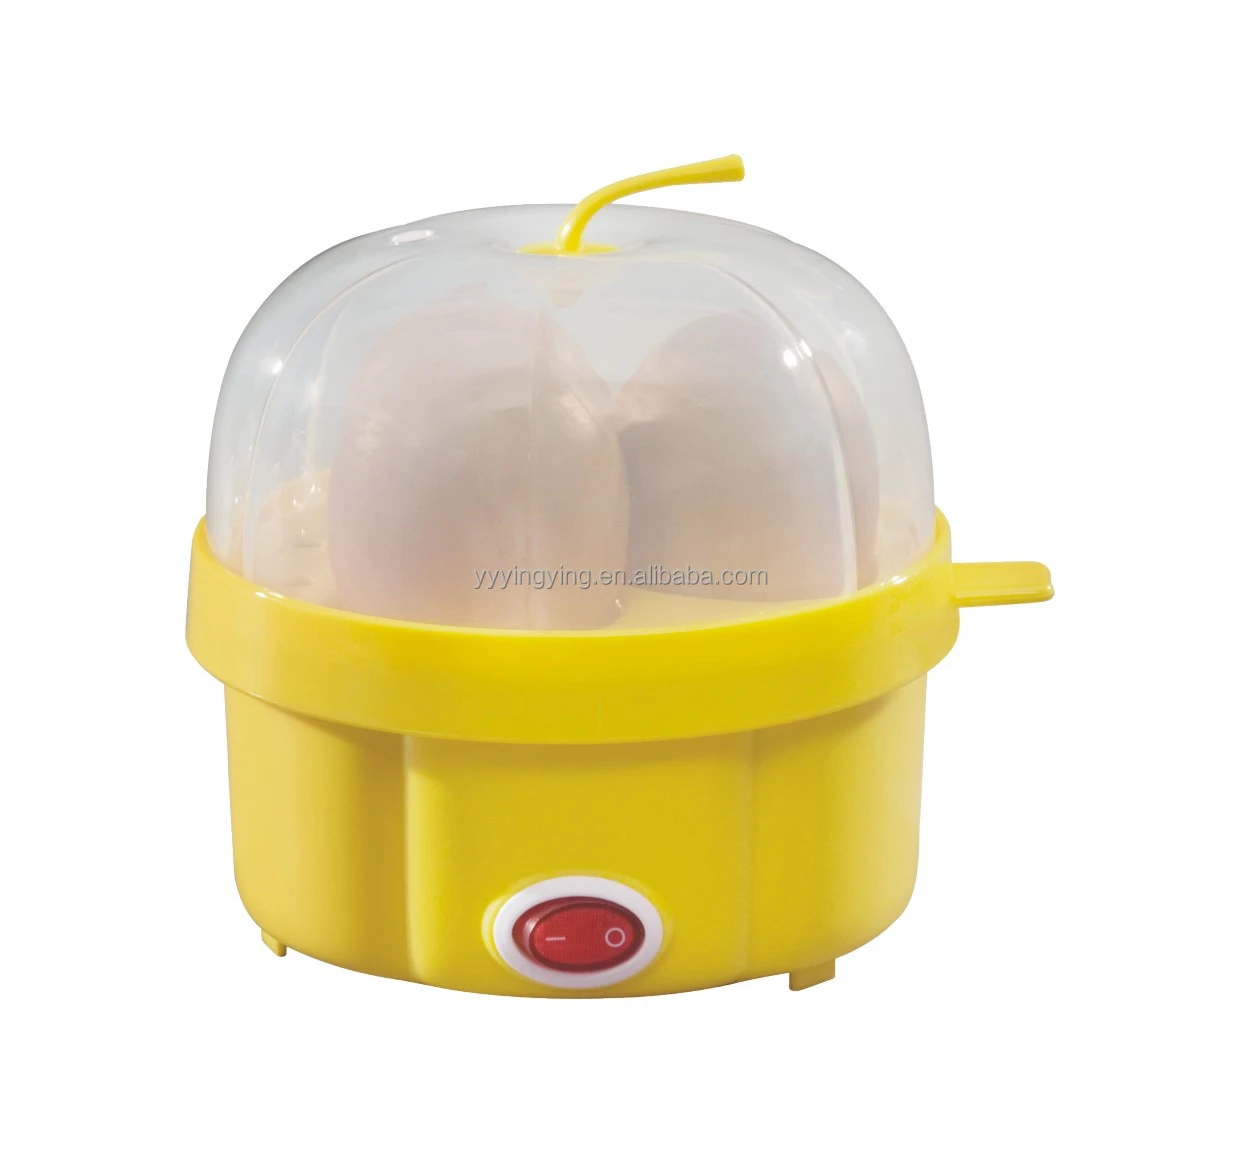 Automatic Electric Hard or Soft Boiled Egg Cooker